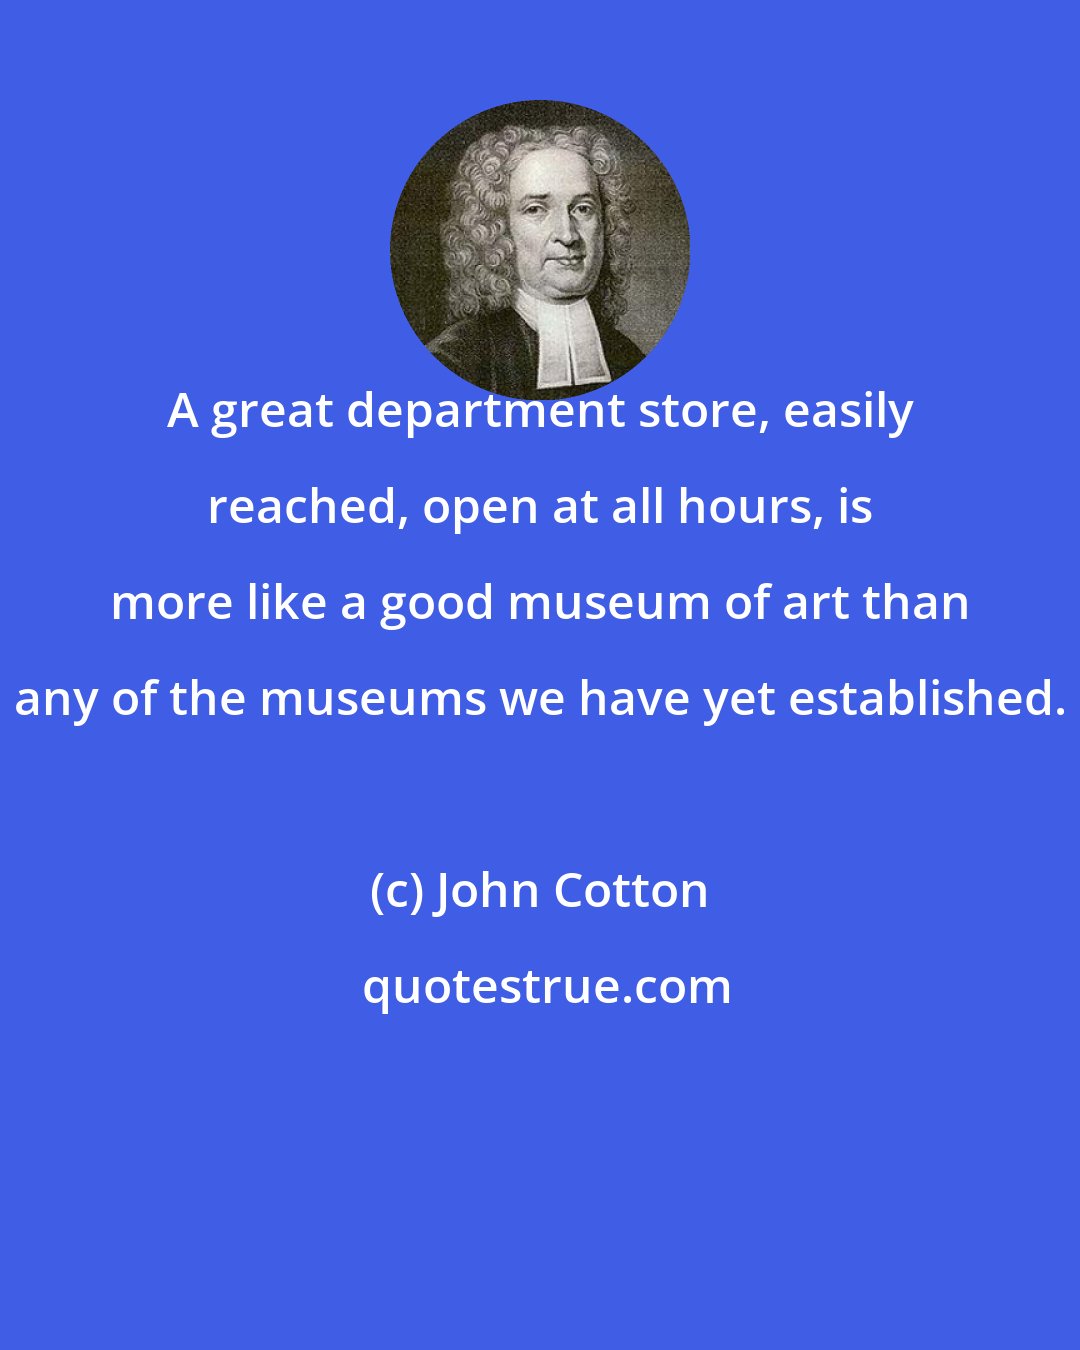 John Cotton: A great department store, easily reached, open at all hours, is more like a good museum of art than any of the museums we have yet established.